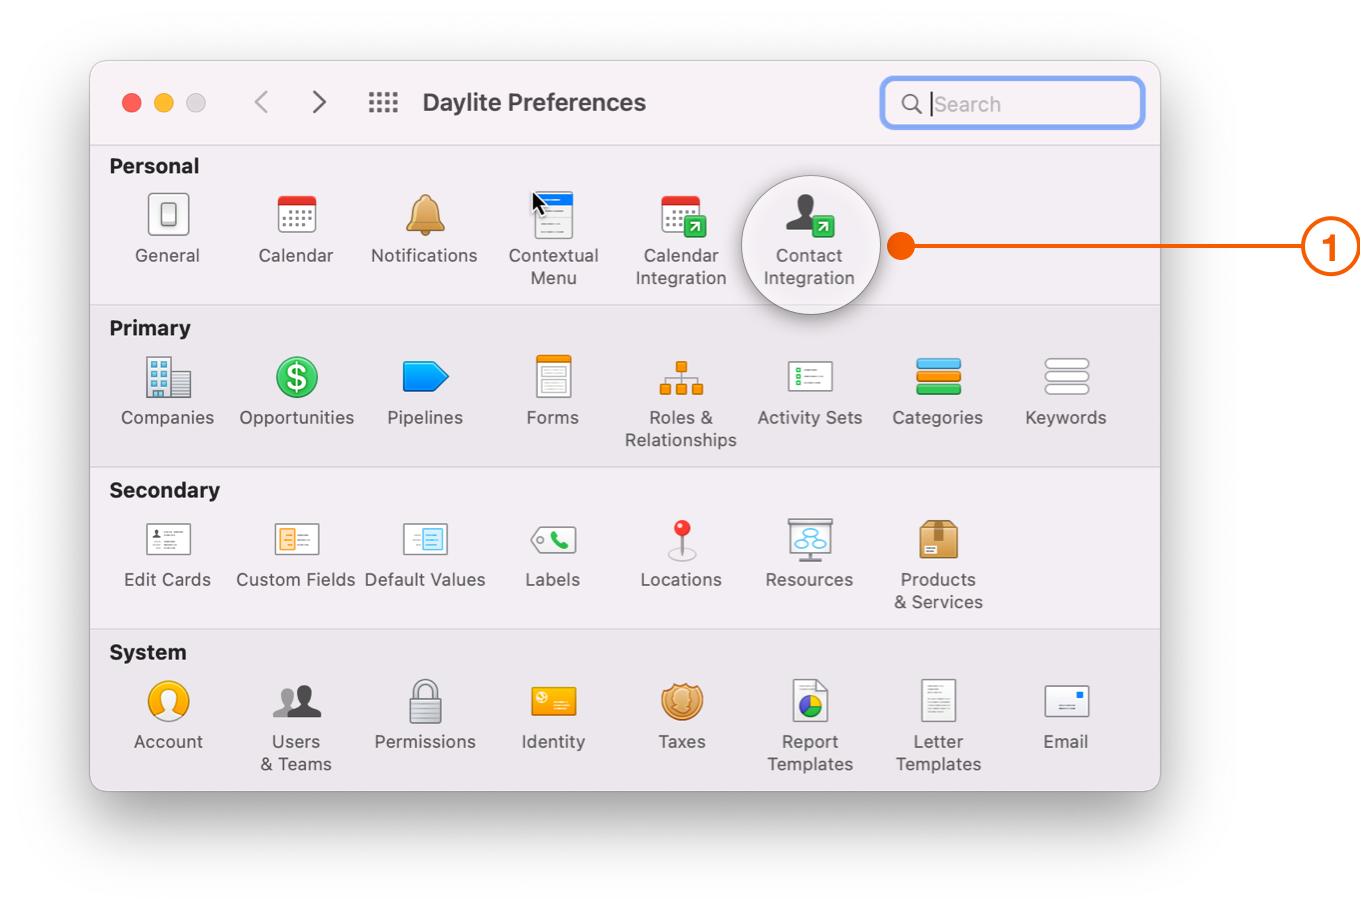 Daylite Preferences selecting Contact Integration